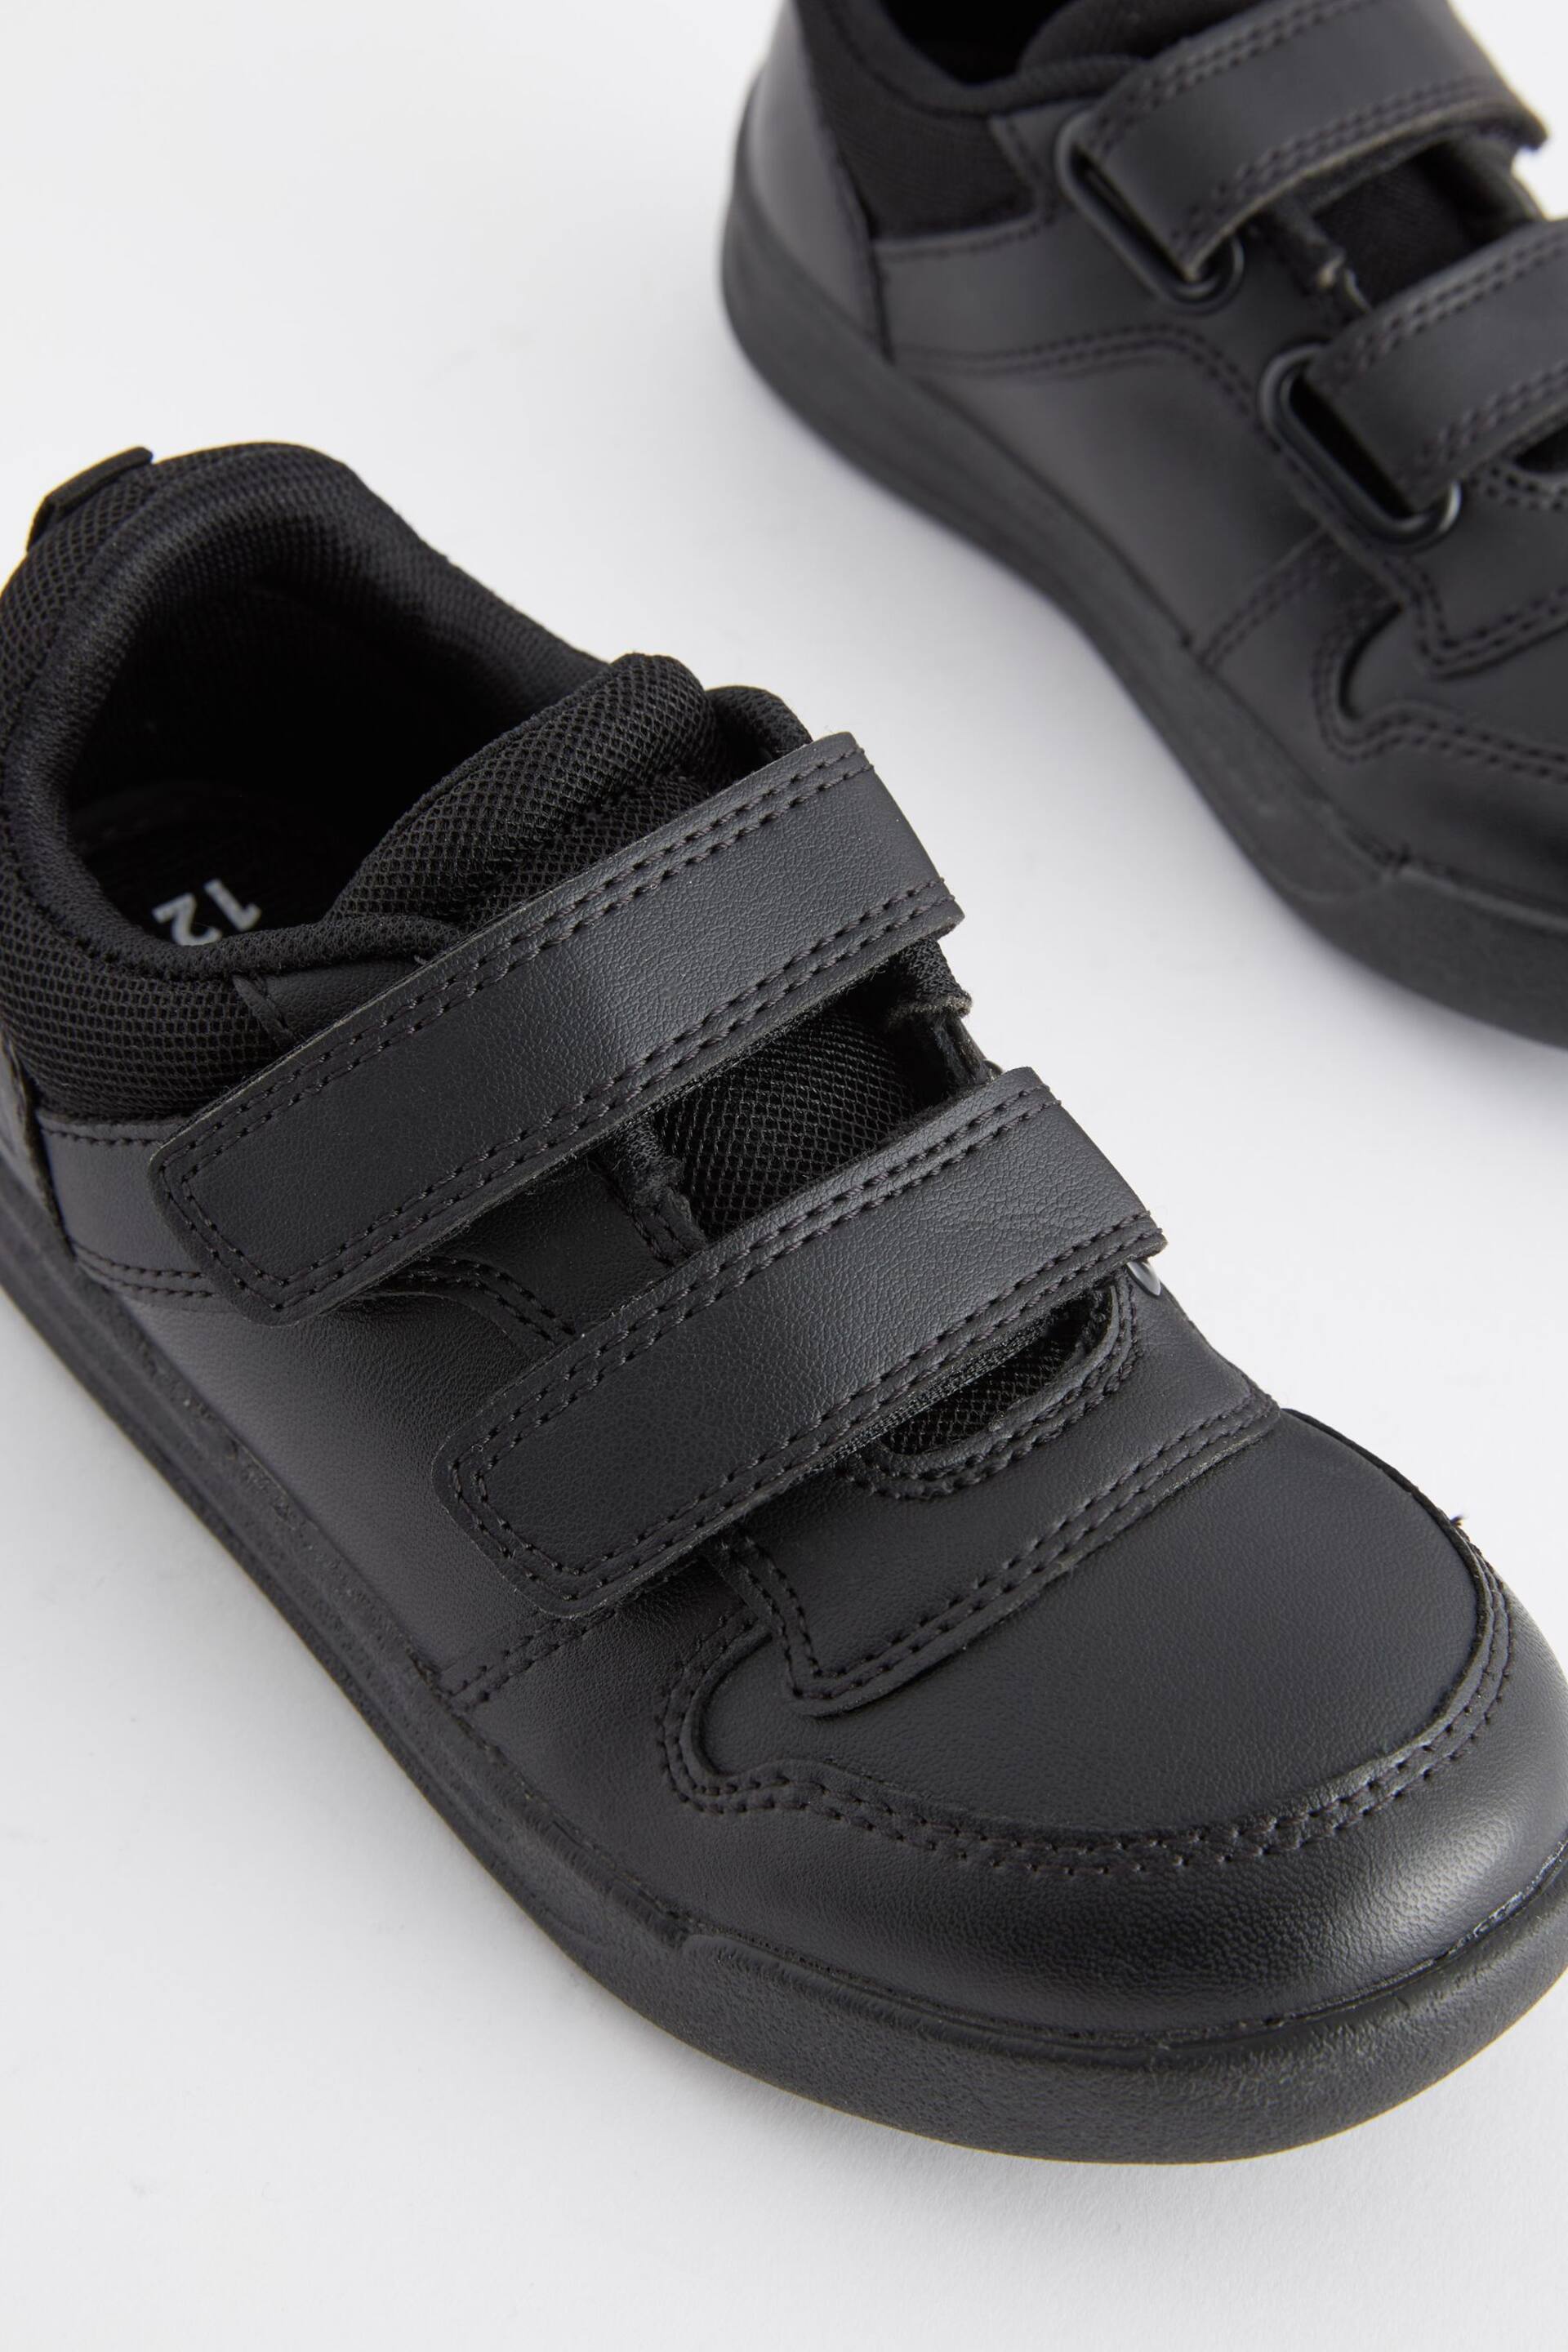 Black Strap Touch Fasten Wide Fit (G) School Trainers - Image 7 of 10